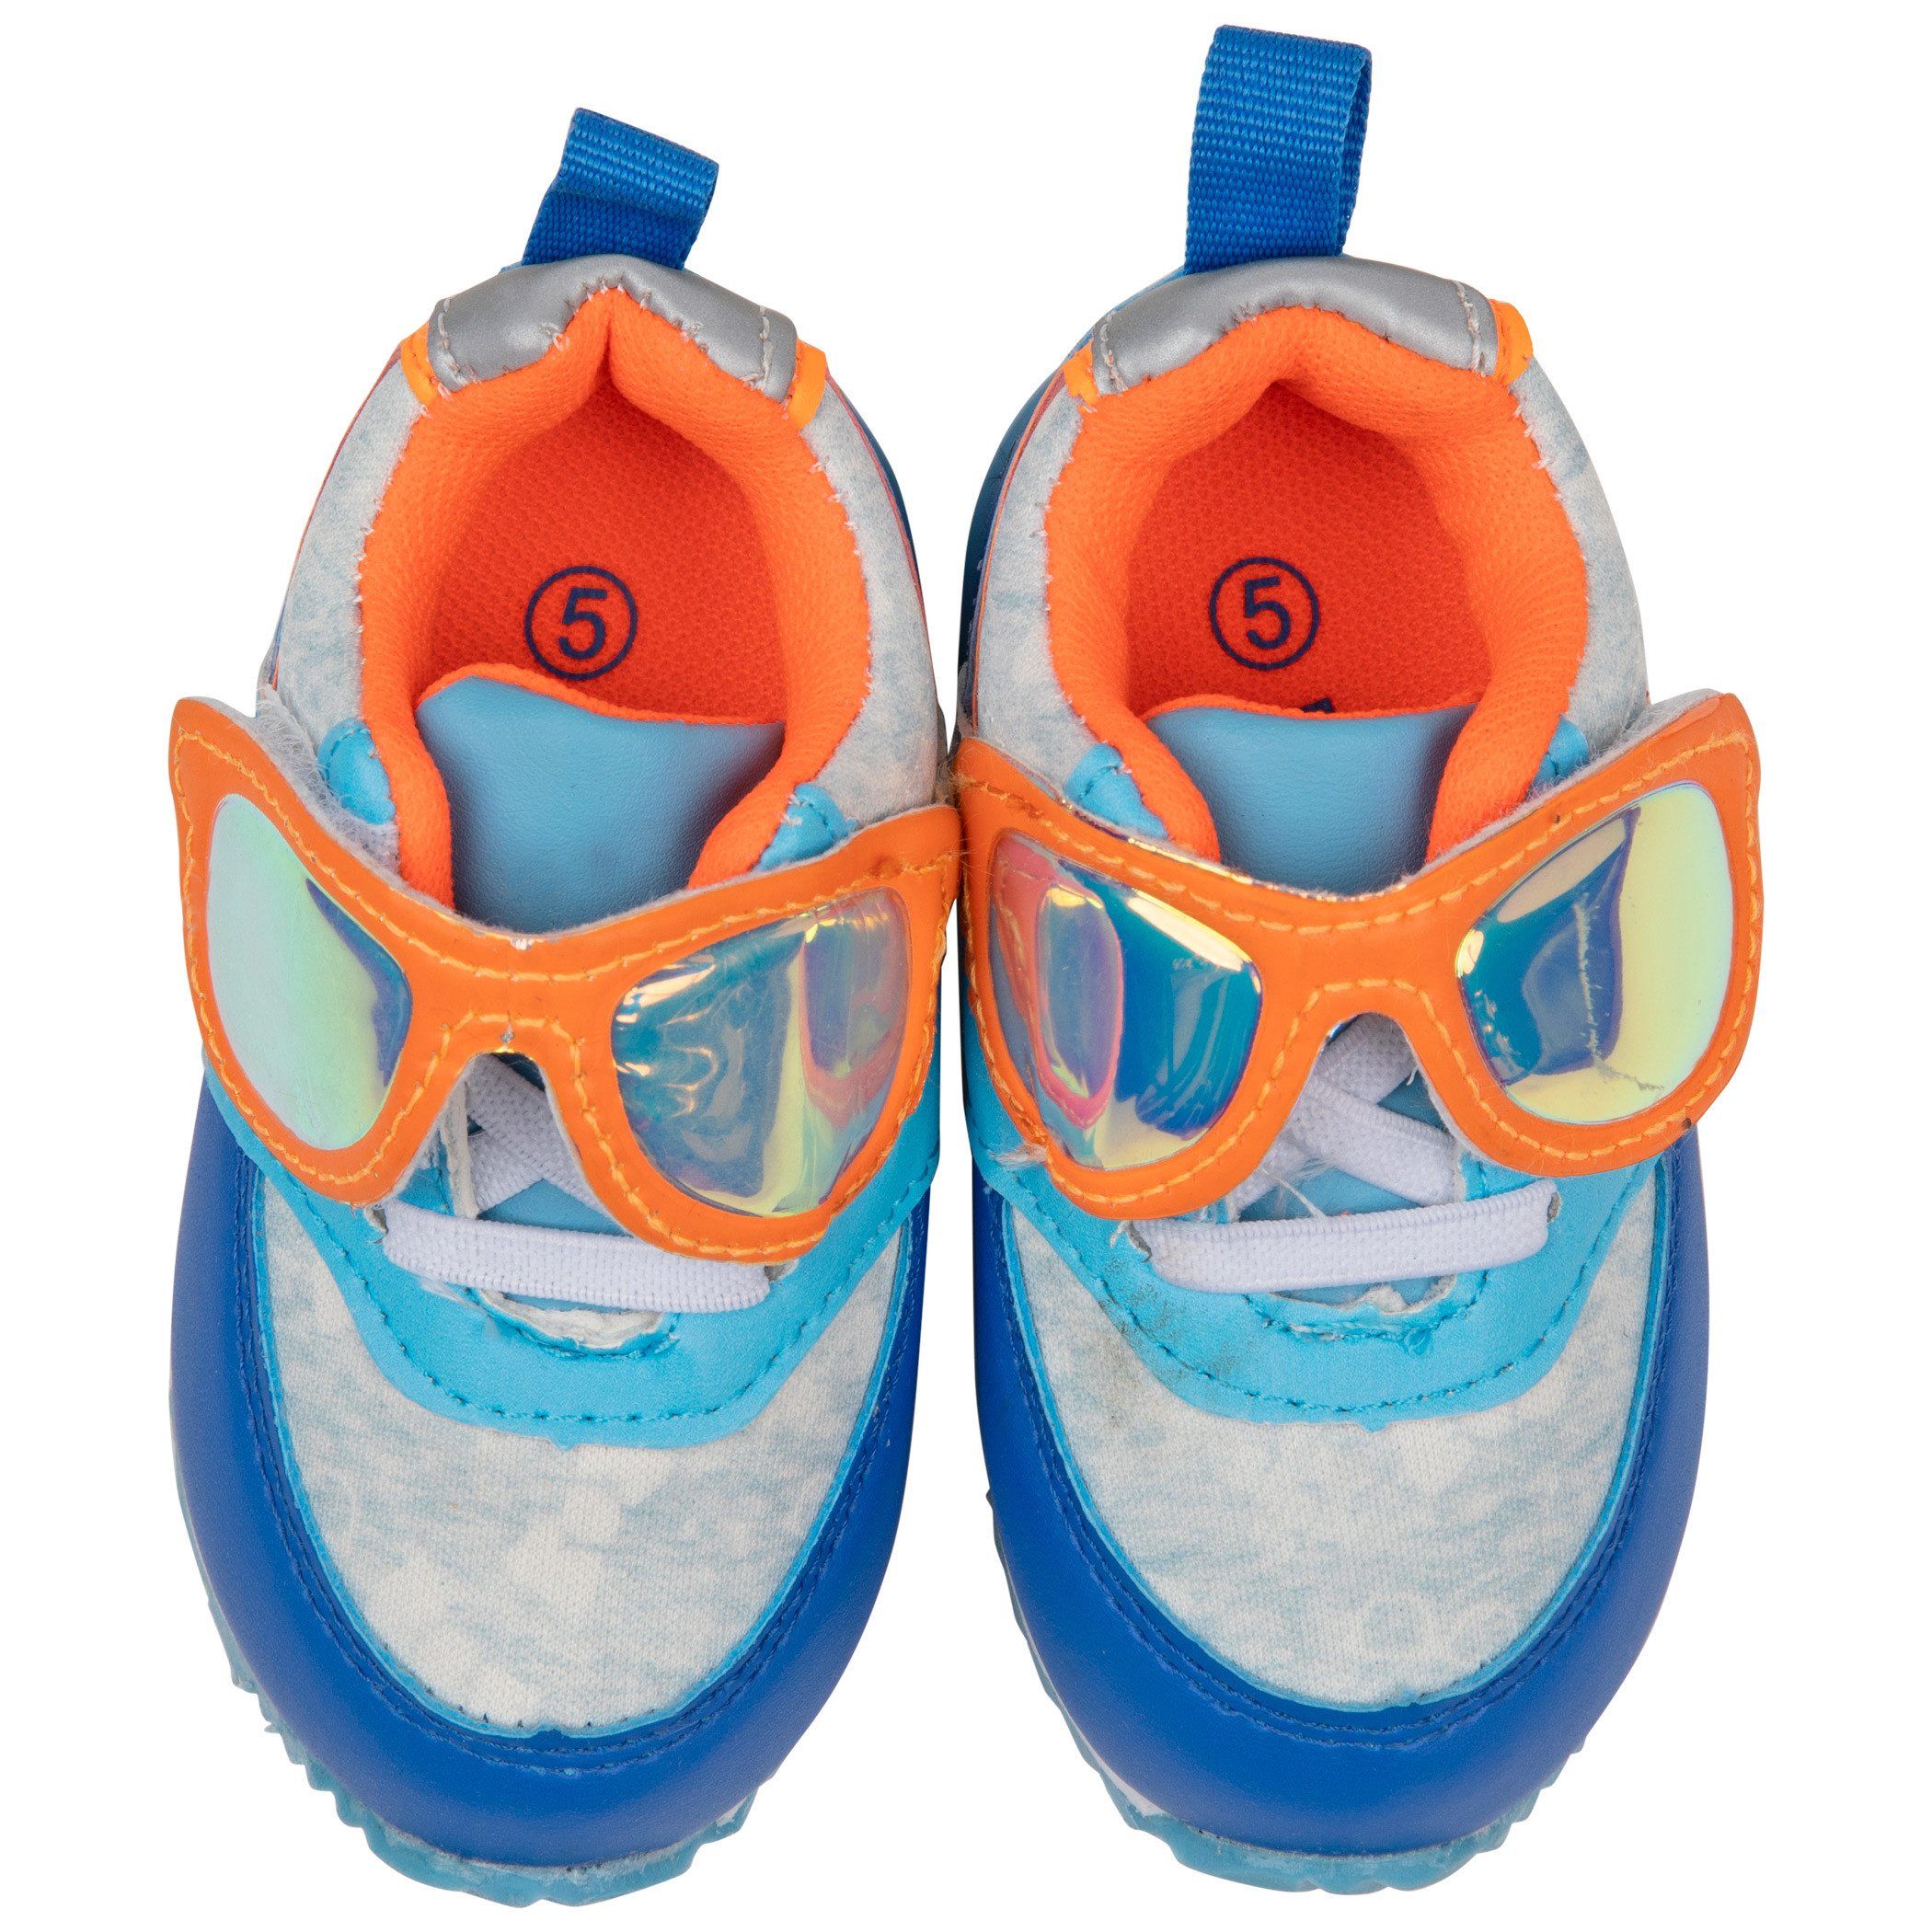 Blippi Character and Glasses Toddlers Shoes